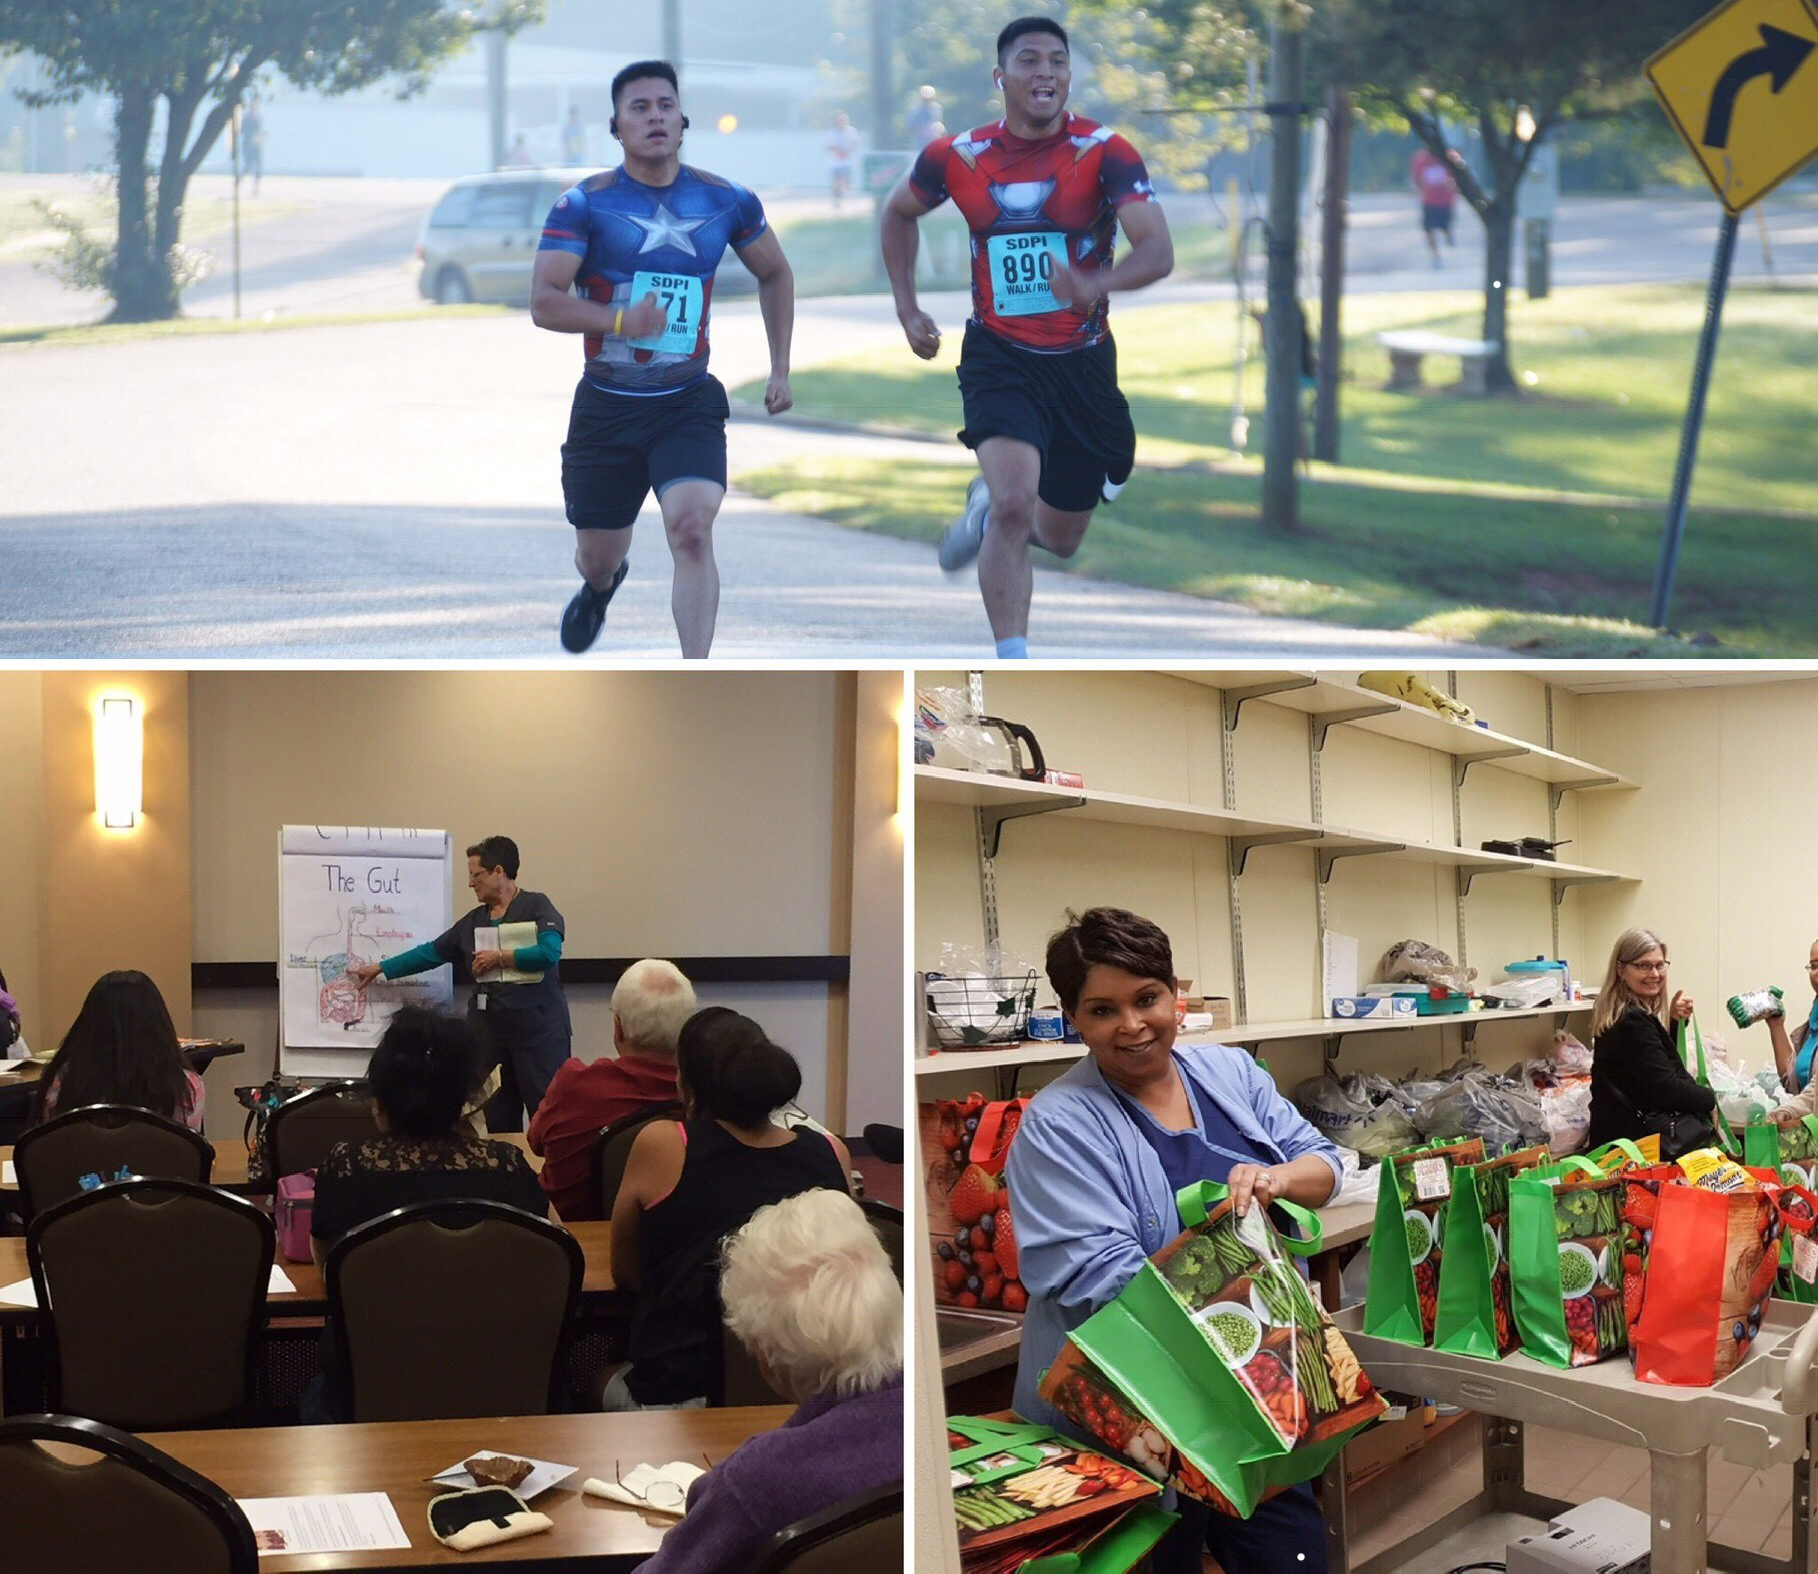 The Special Diabetes Program for Indians has a variety of events throughout Indian Country to encourage healthier activities to prevent diabetes.